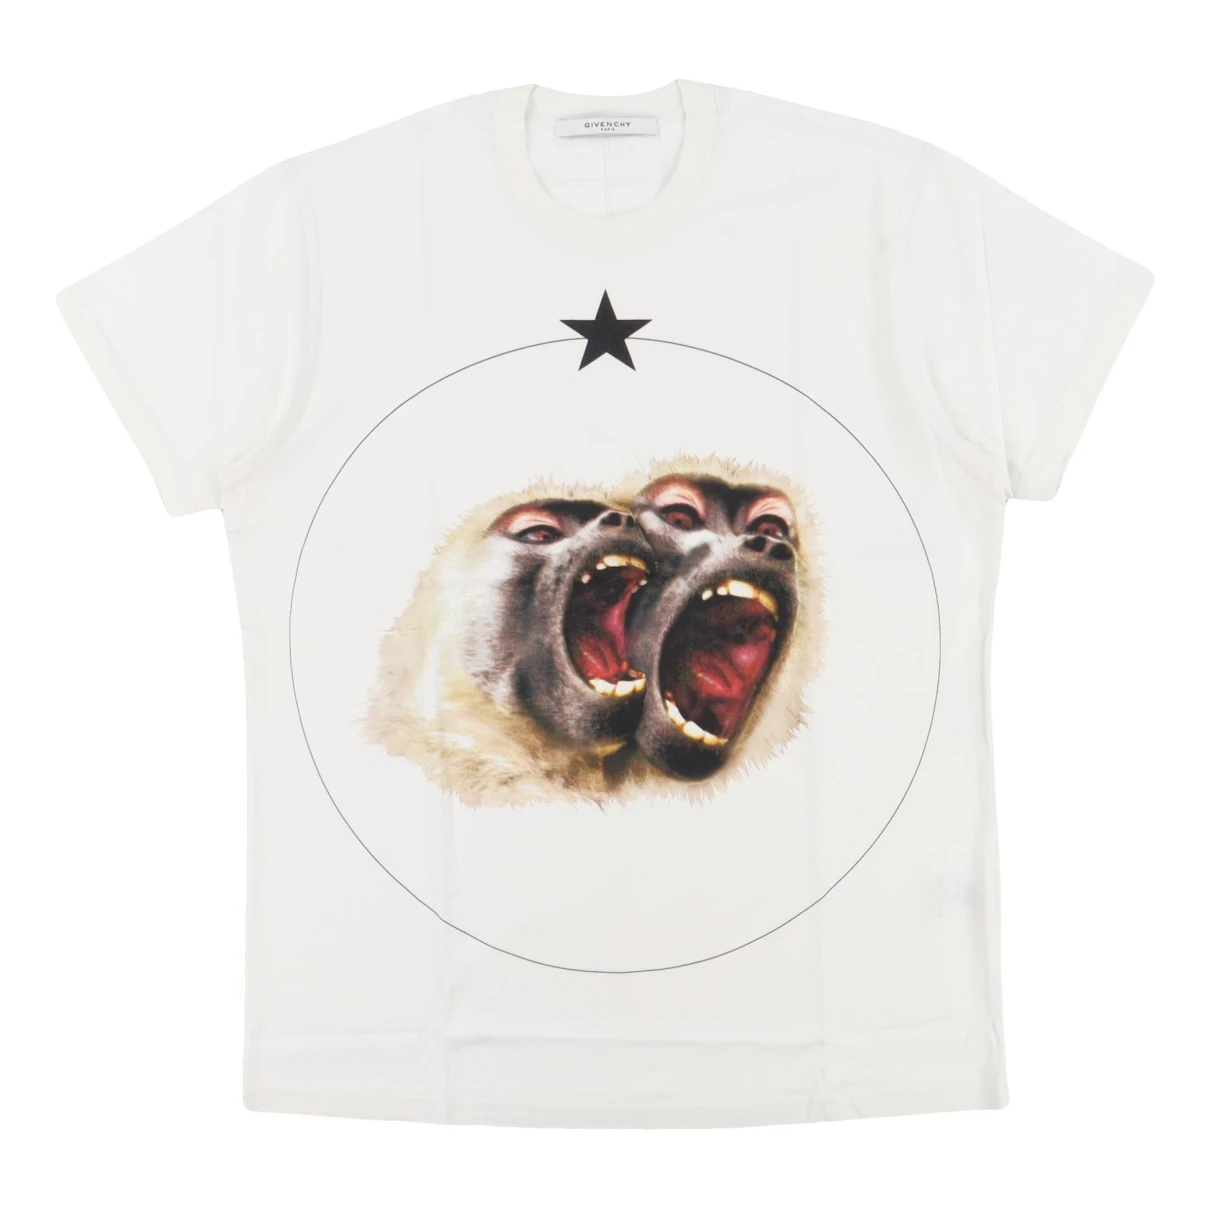 Pre-owned Givenchy T-shirt In White